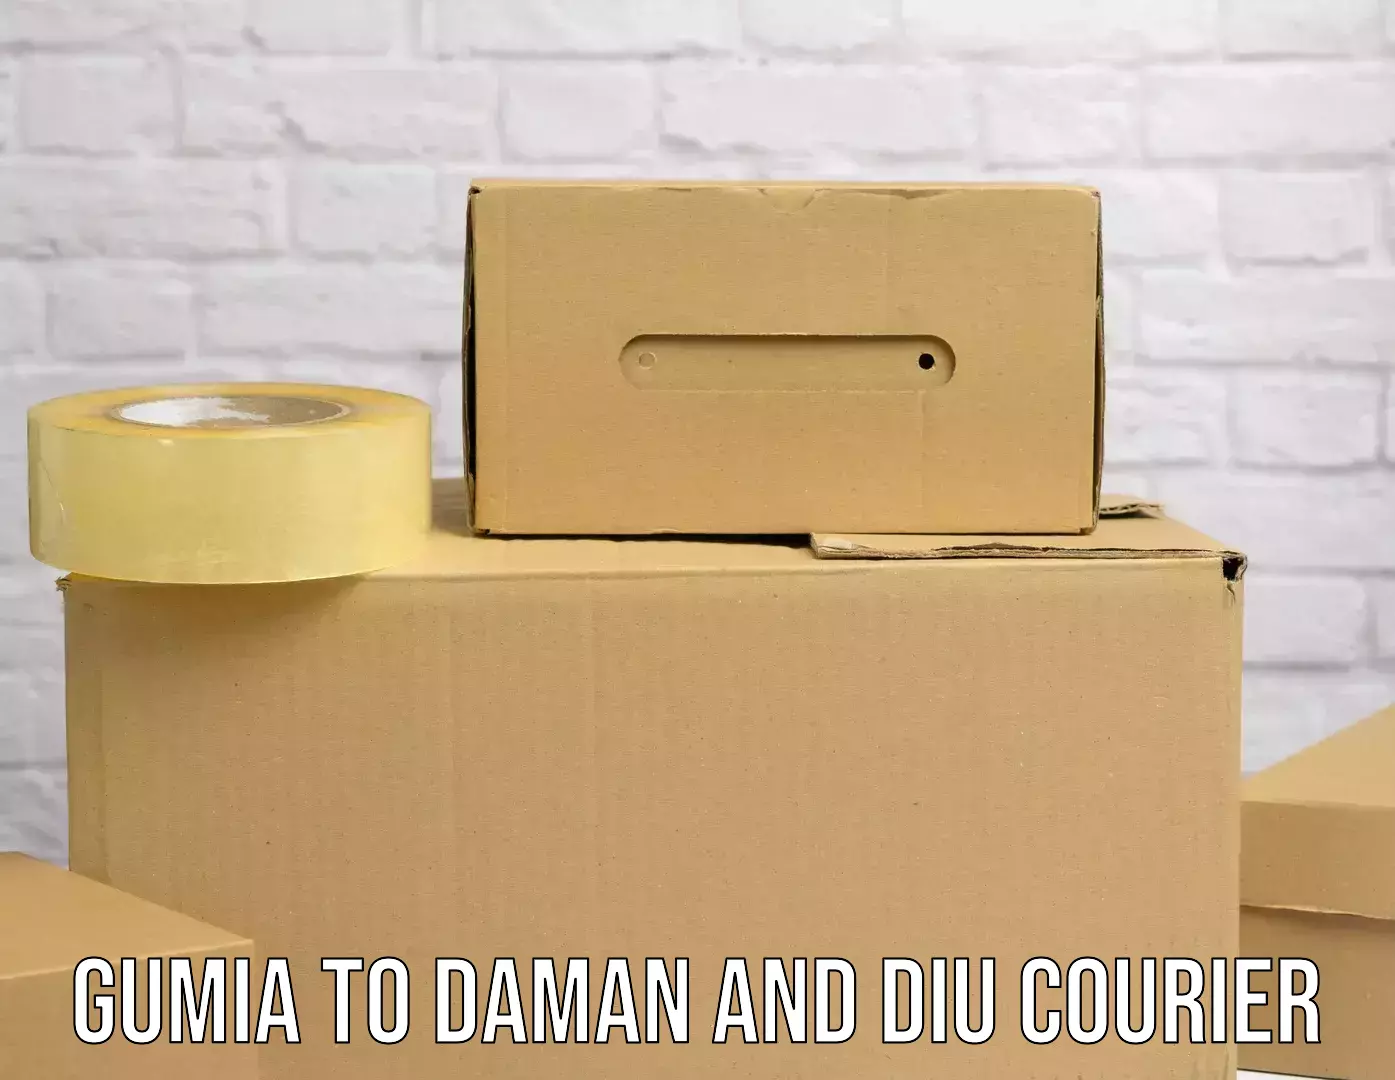 Weekend courier service Gumia to Diu